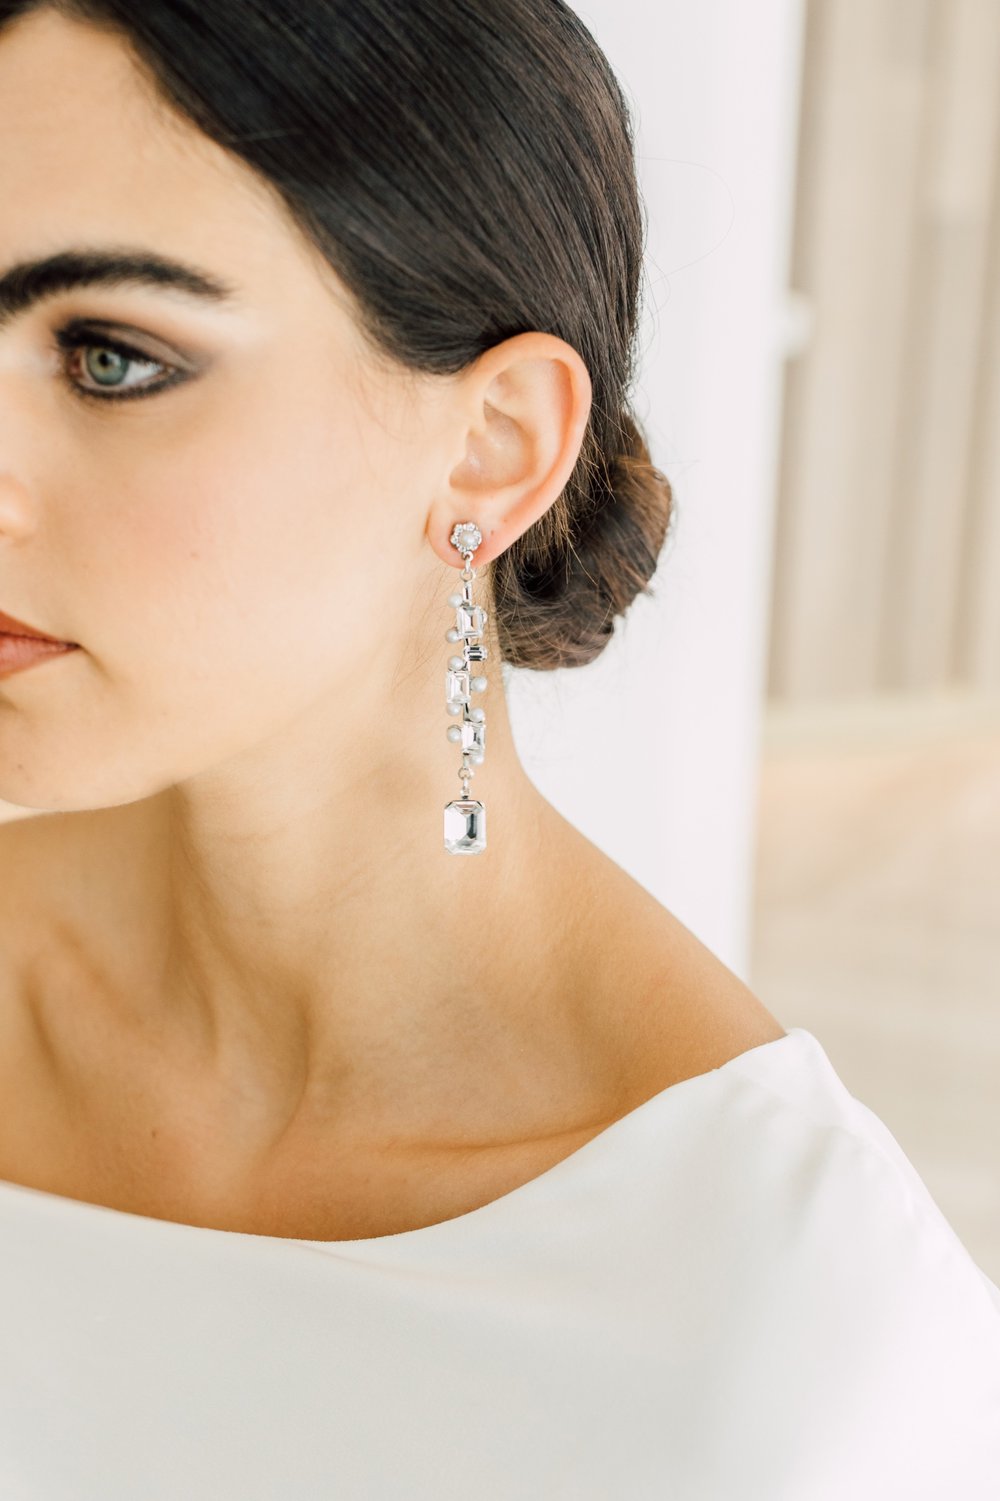 Cool Earrings for Brides